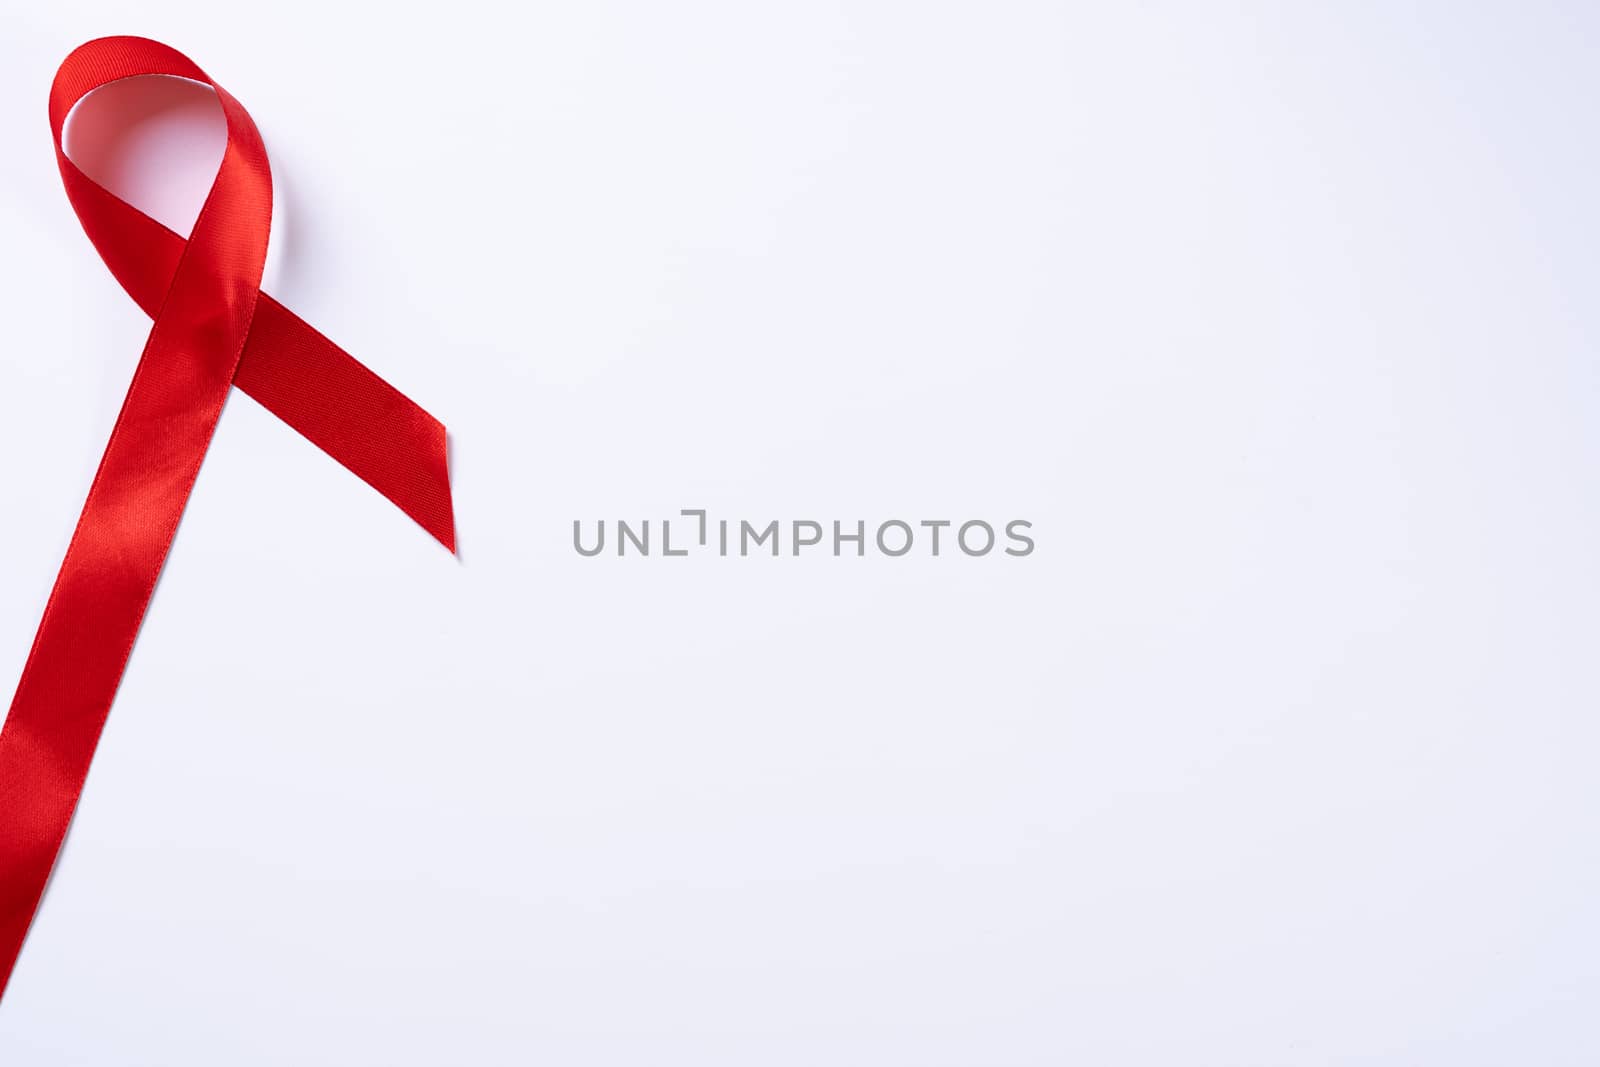 Aids awareness, red ribbon on white background with copy space for text. World Aids Day, Healthcare and medical concept.